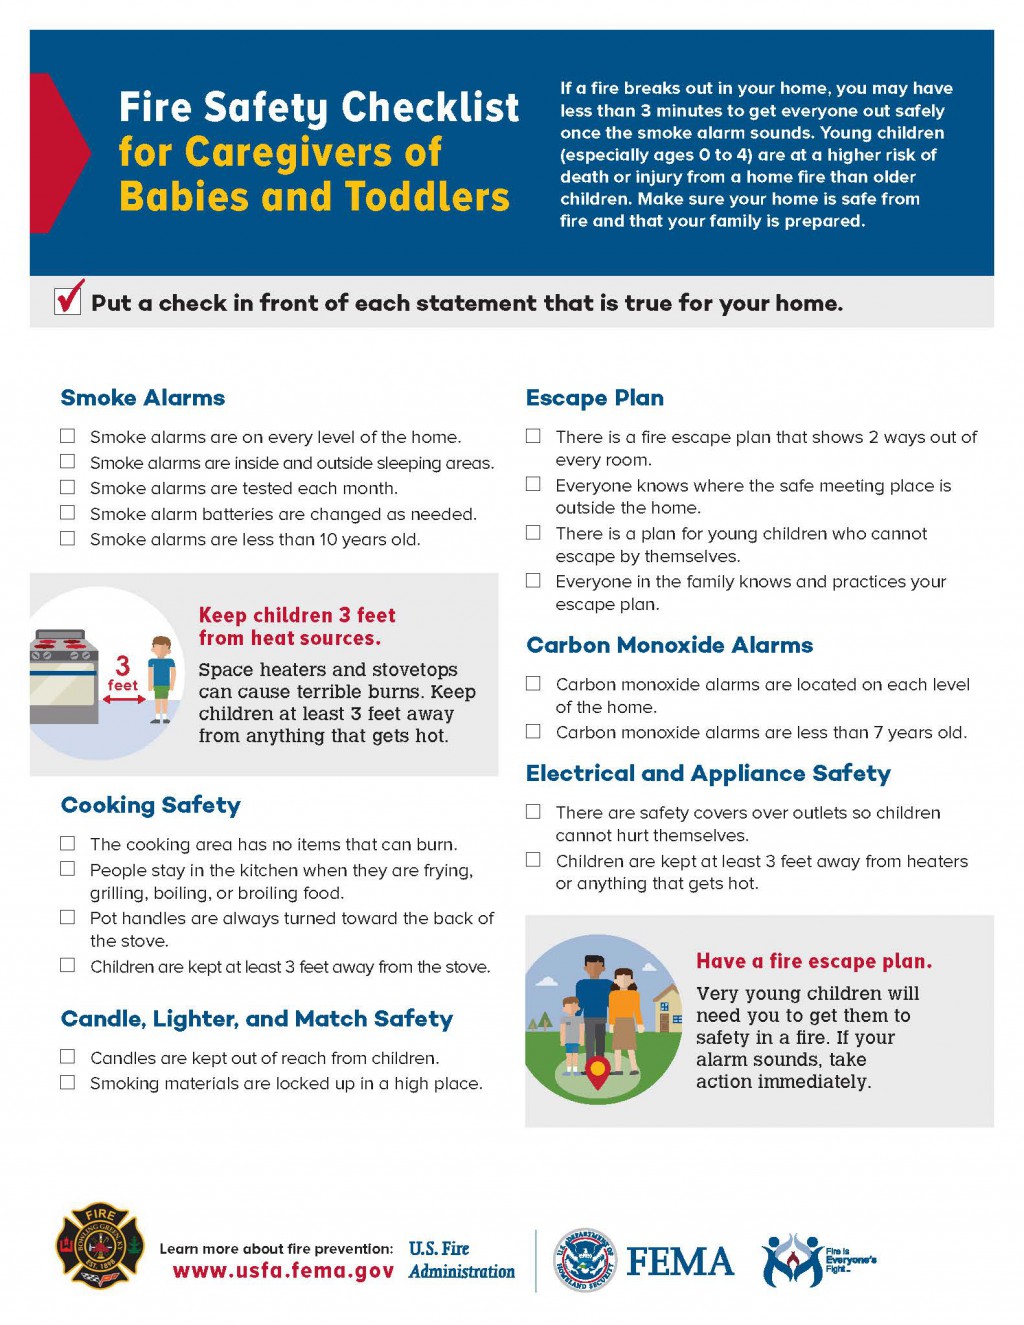 Fire Safety Checklist for caregivers of babies and toddlers English